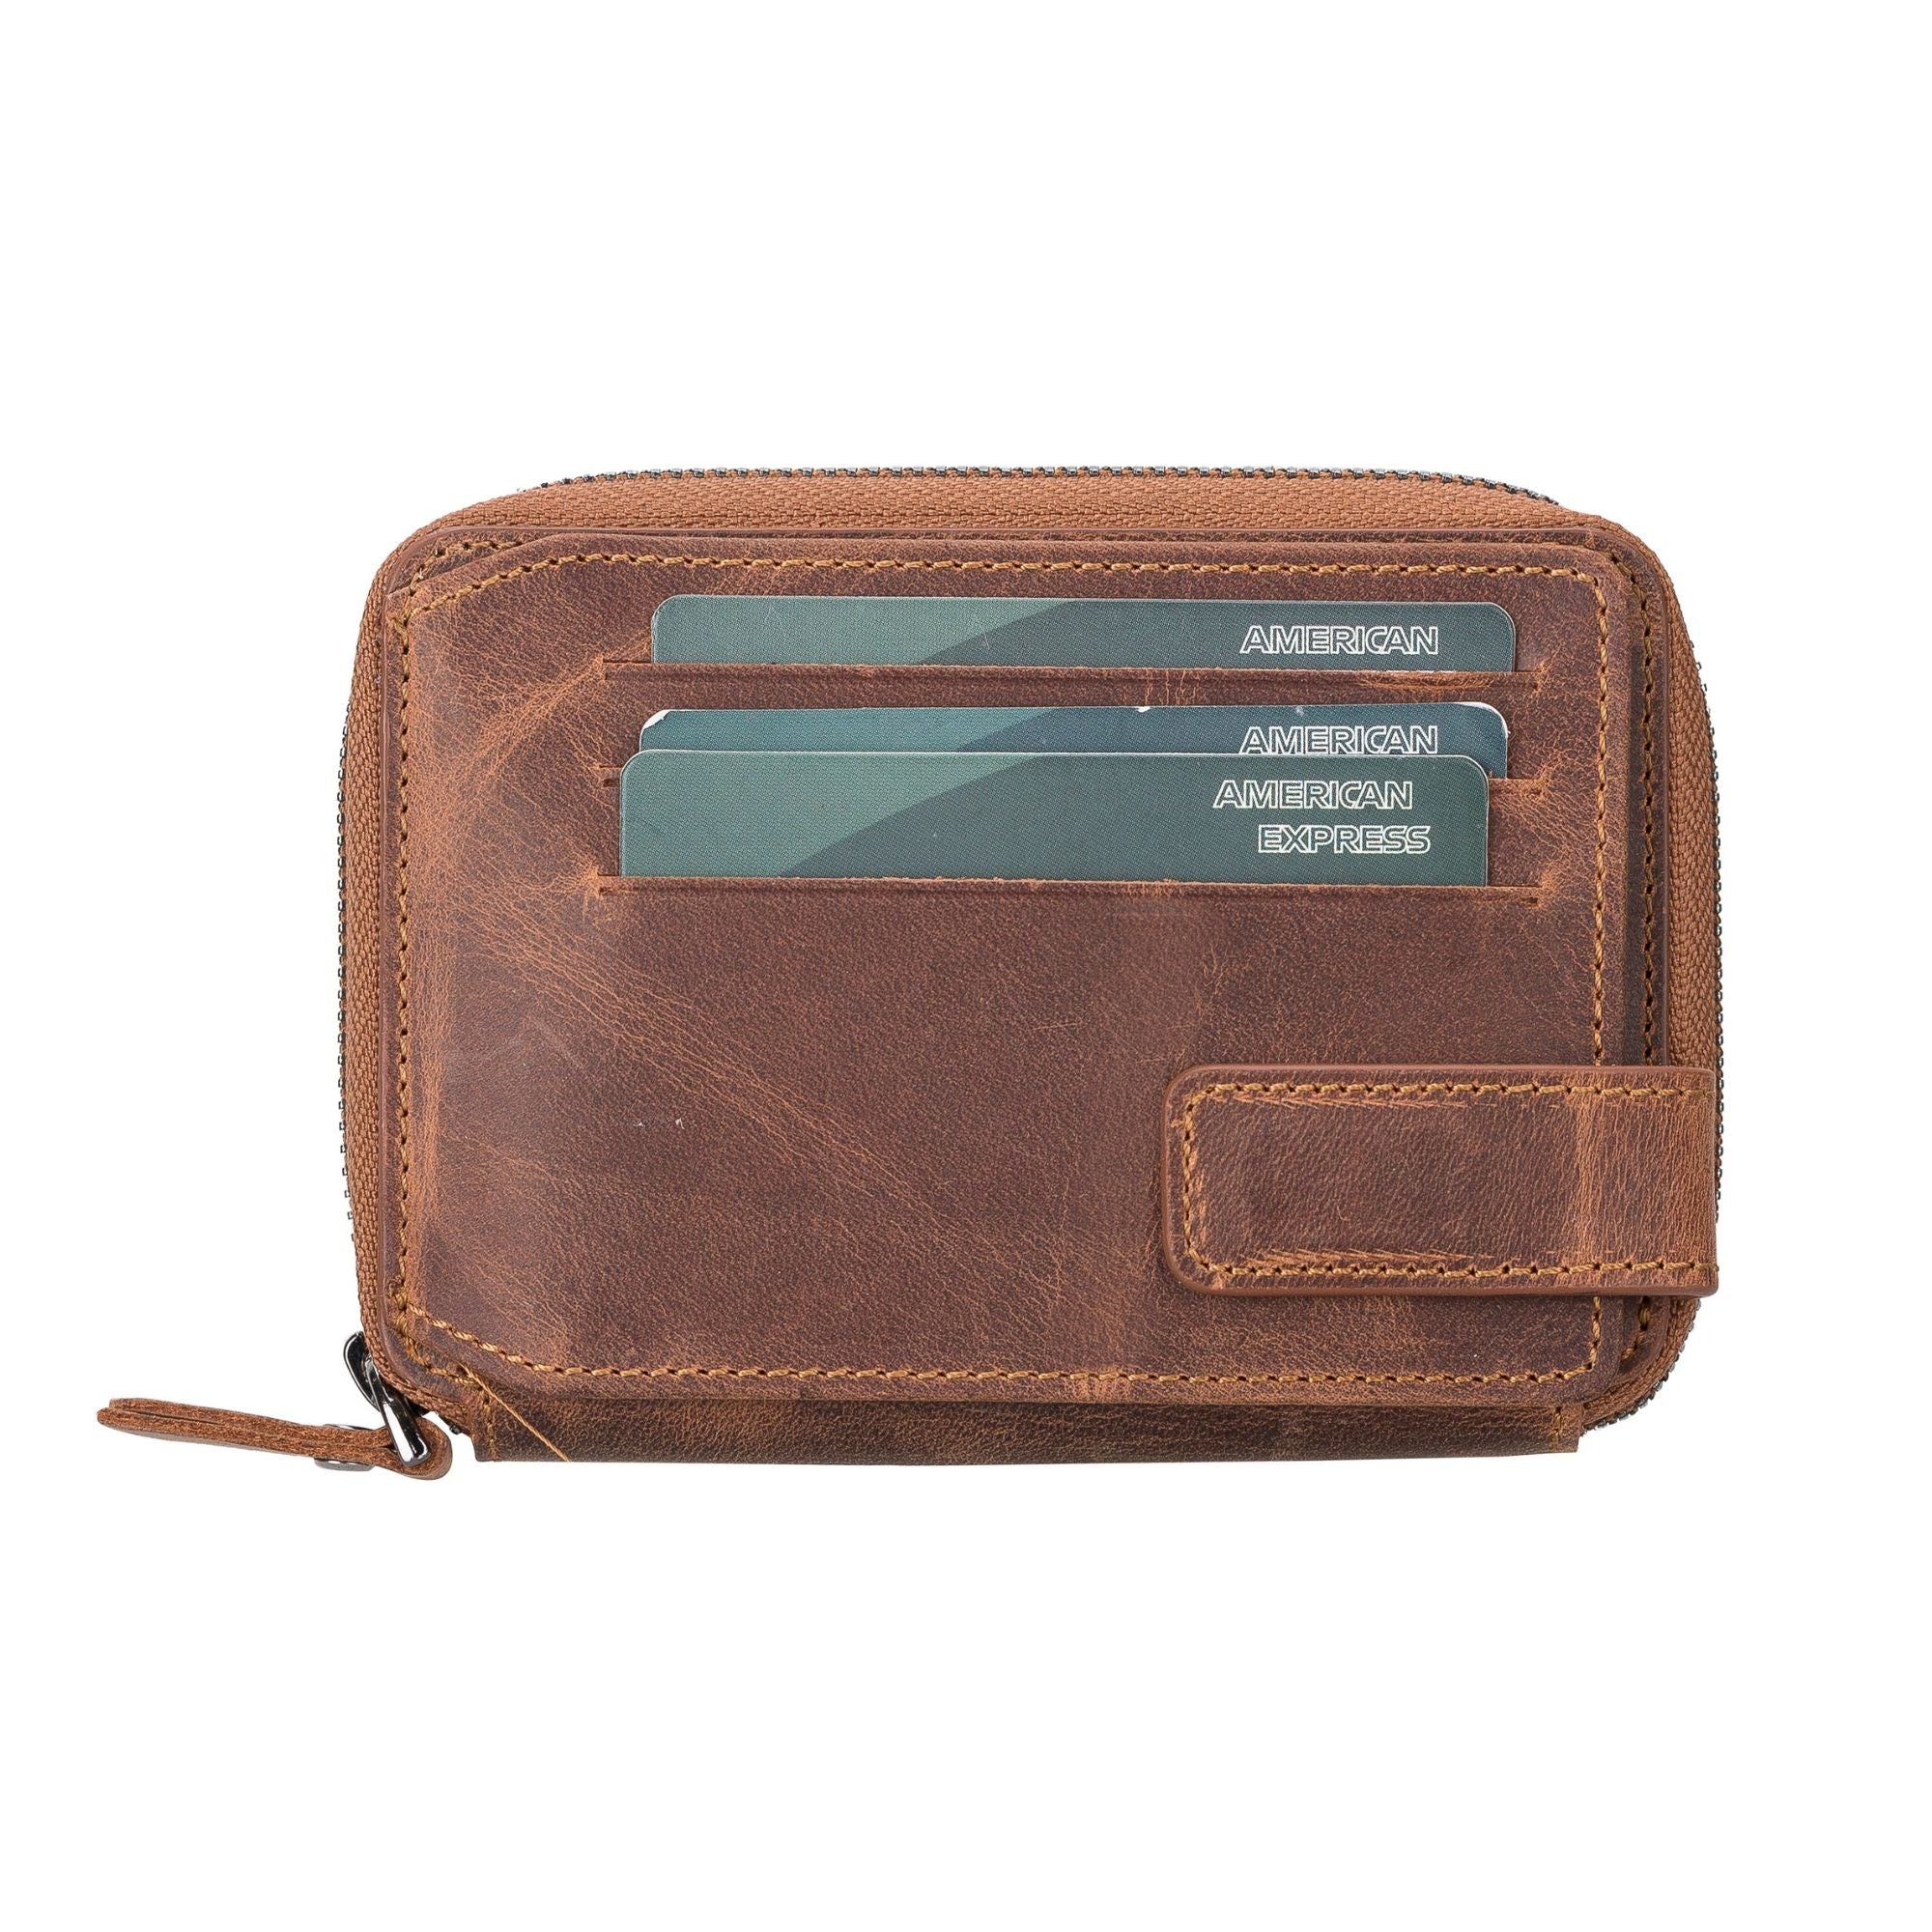 Powell Handmade Unisex Leather Wallet with Zippered Compartment - Dark Brown - TORONATA